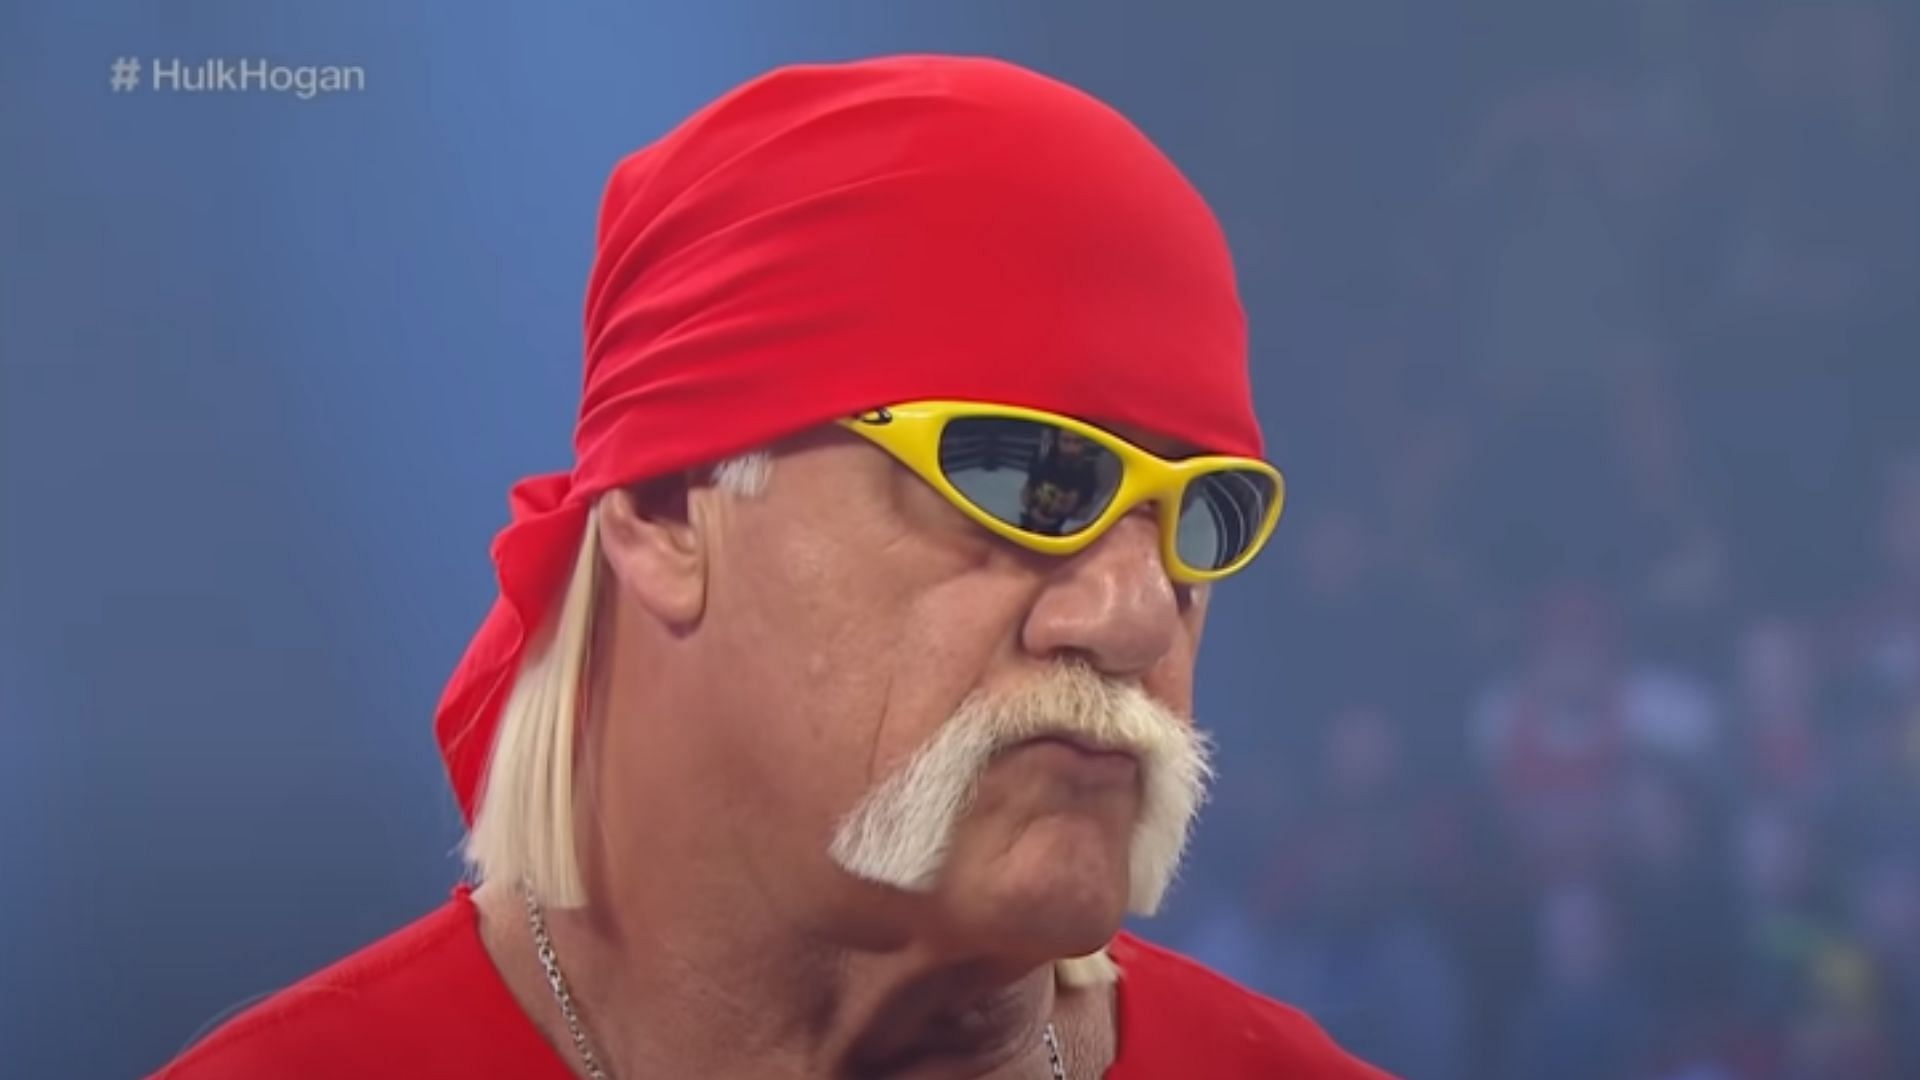 Hulk Hogan is one of the most famous wrestlers of all time.